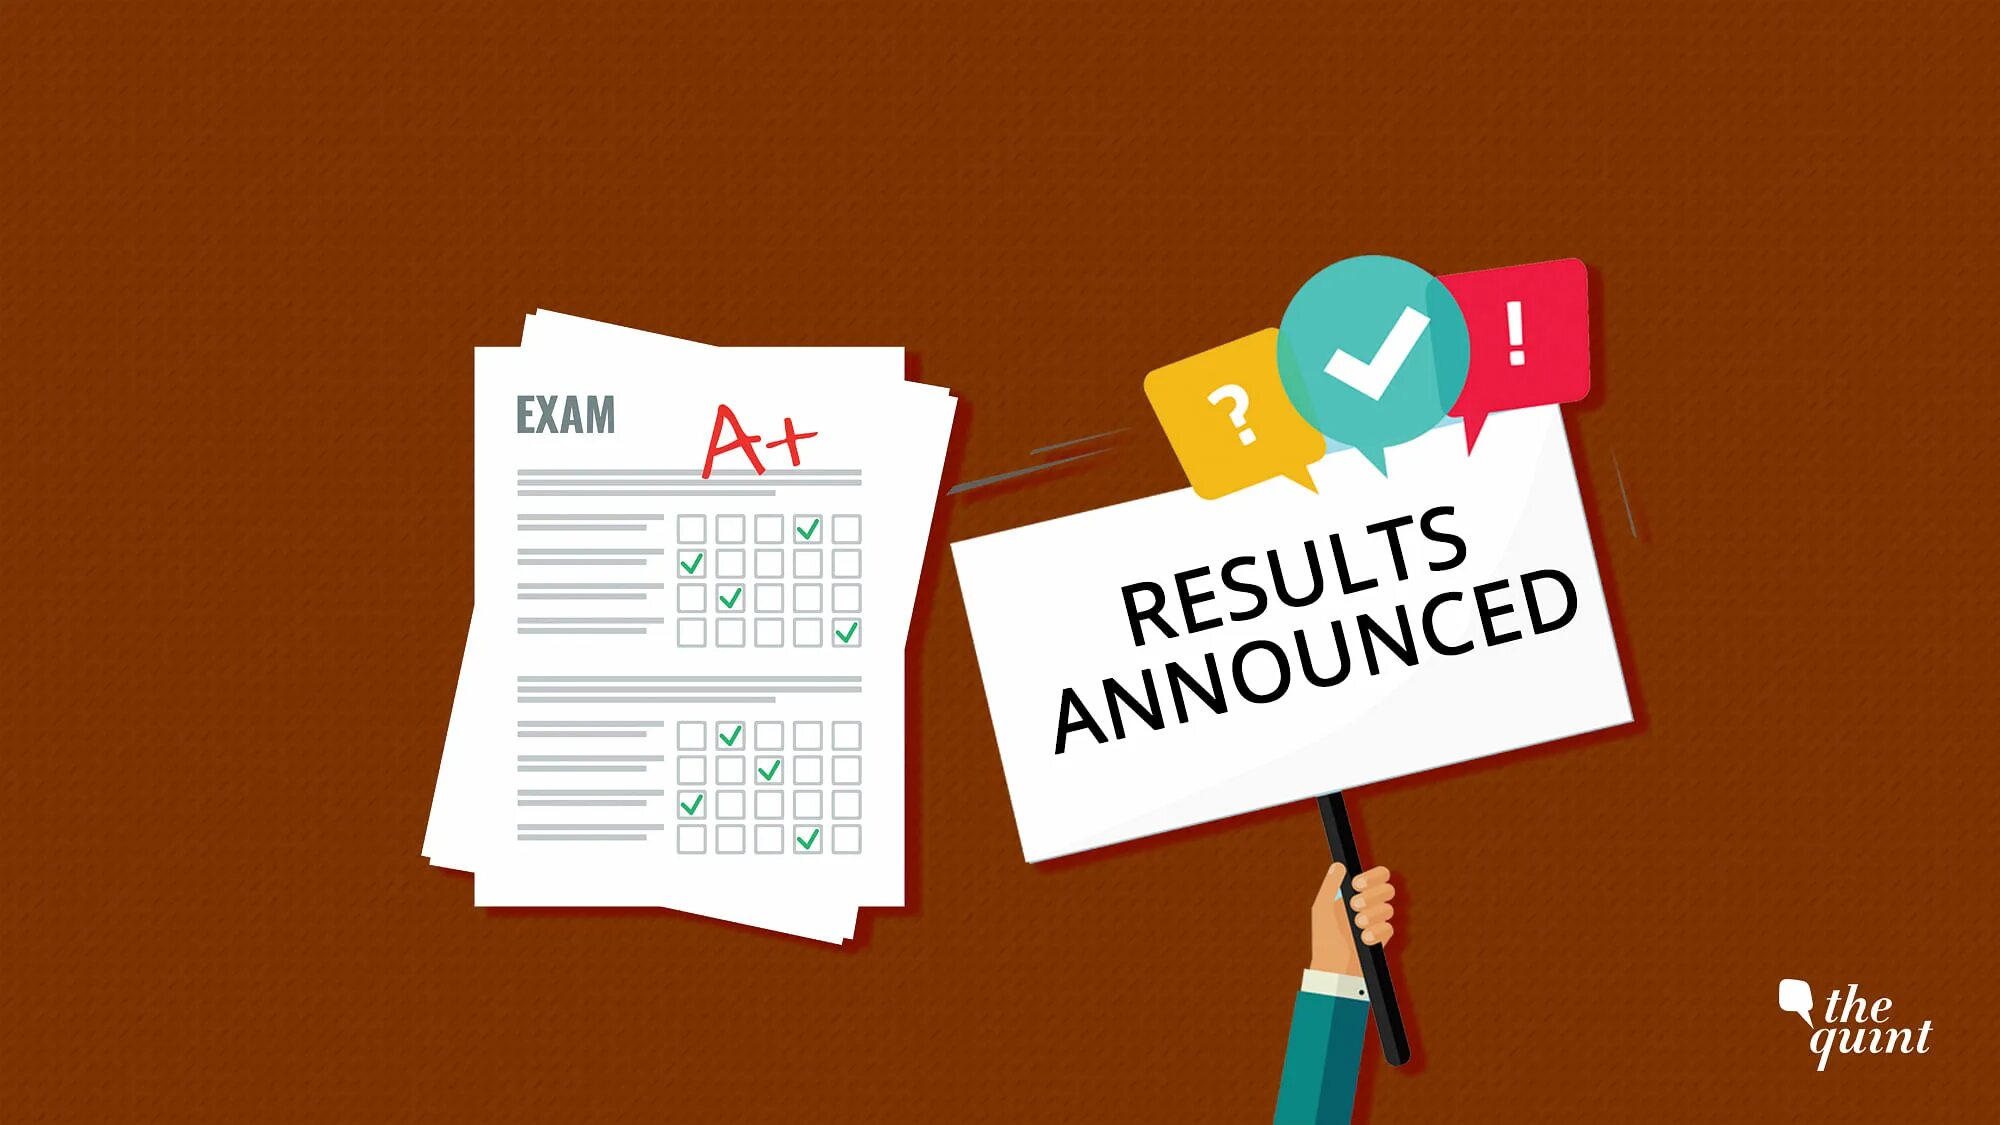 Pass exams successfully. Exam Results. Results картинка. Exam Results student. Examination Result.